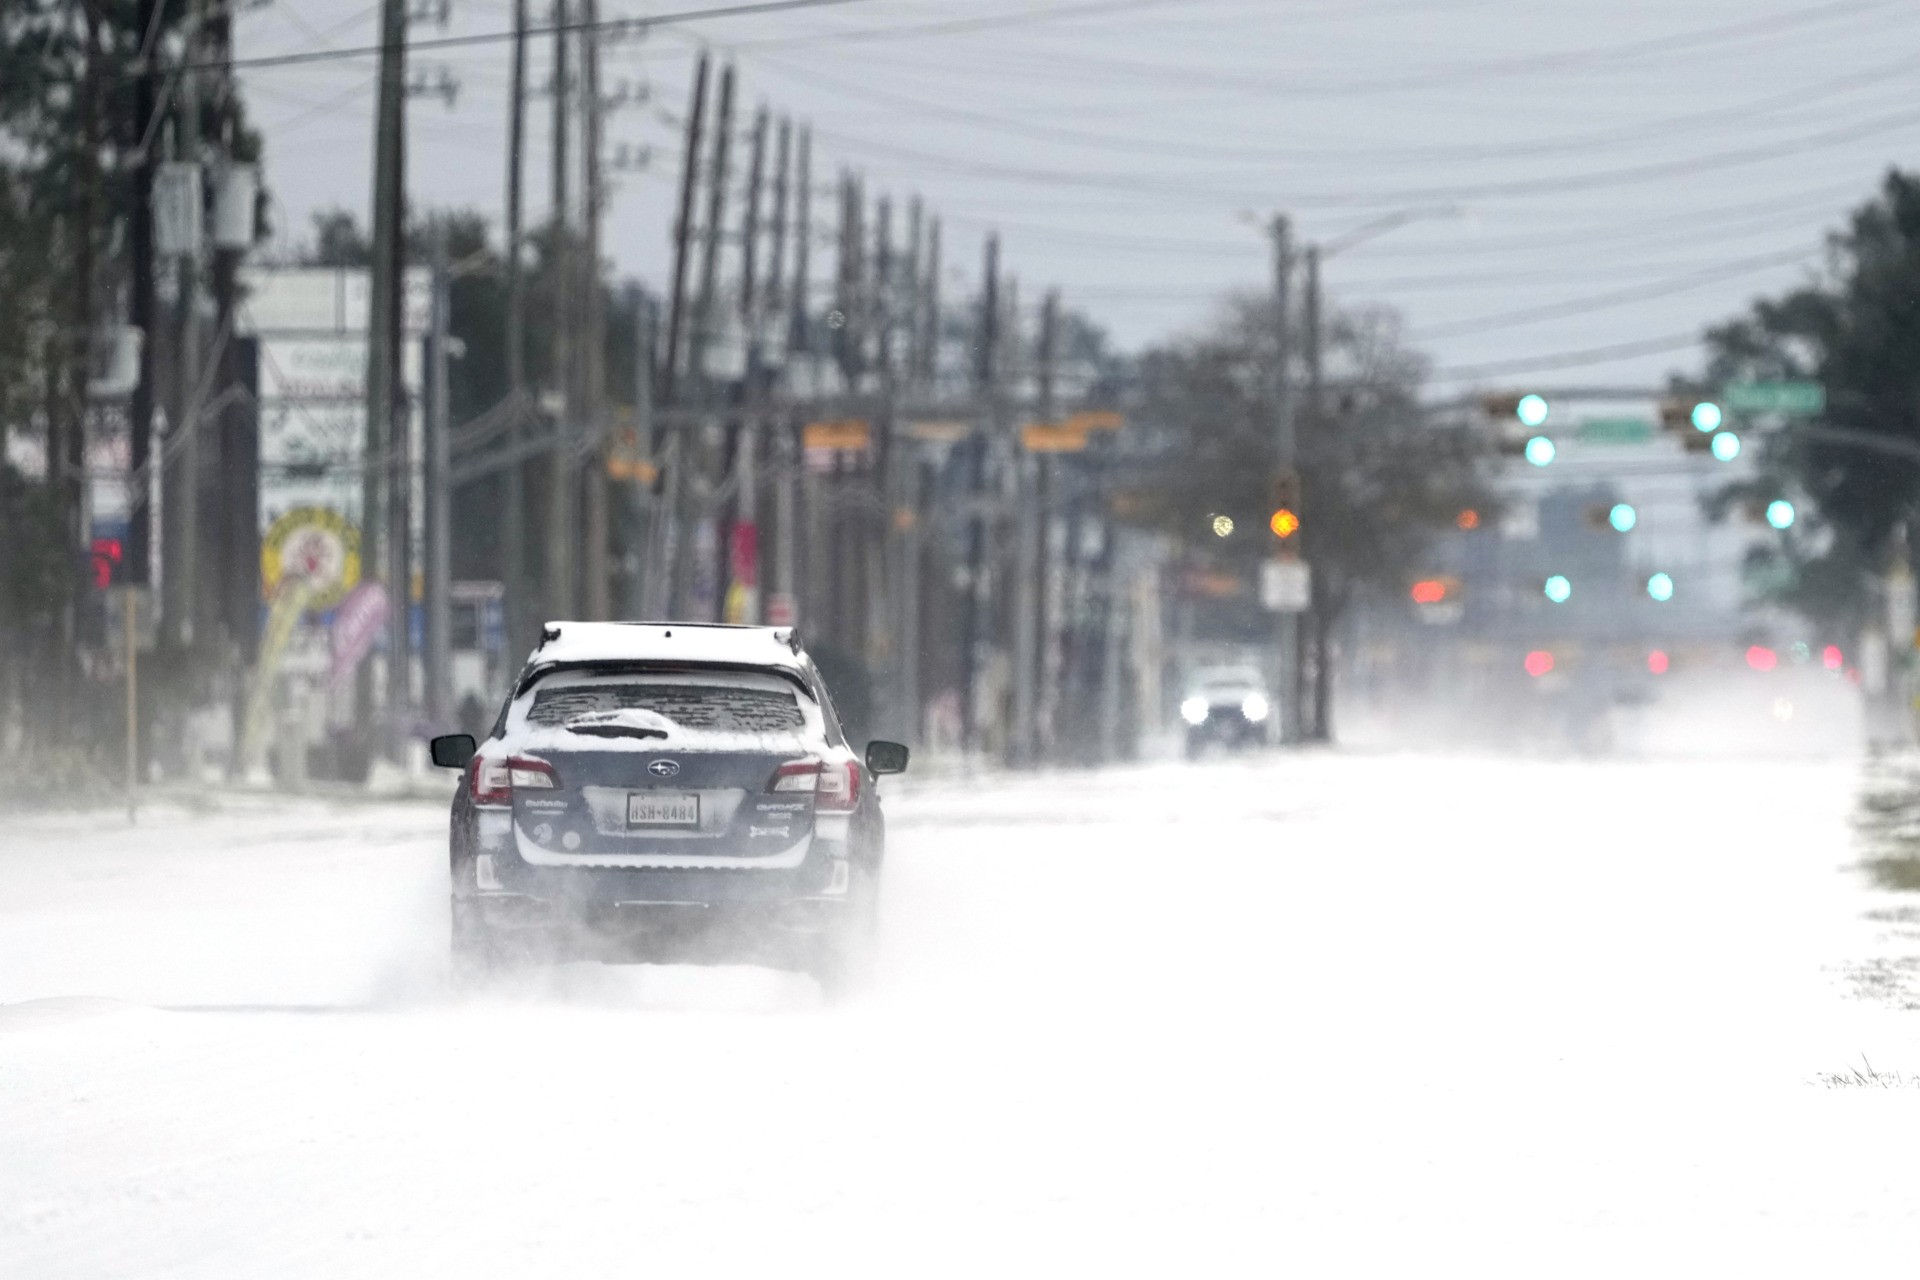 Photos Millions Without Power in Texas as Snow Storm Slams U.S.